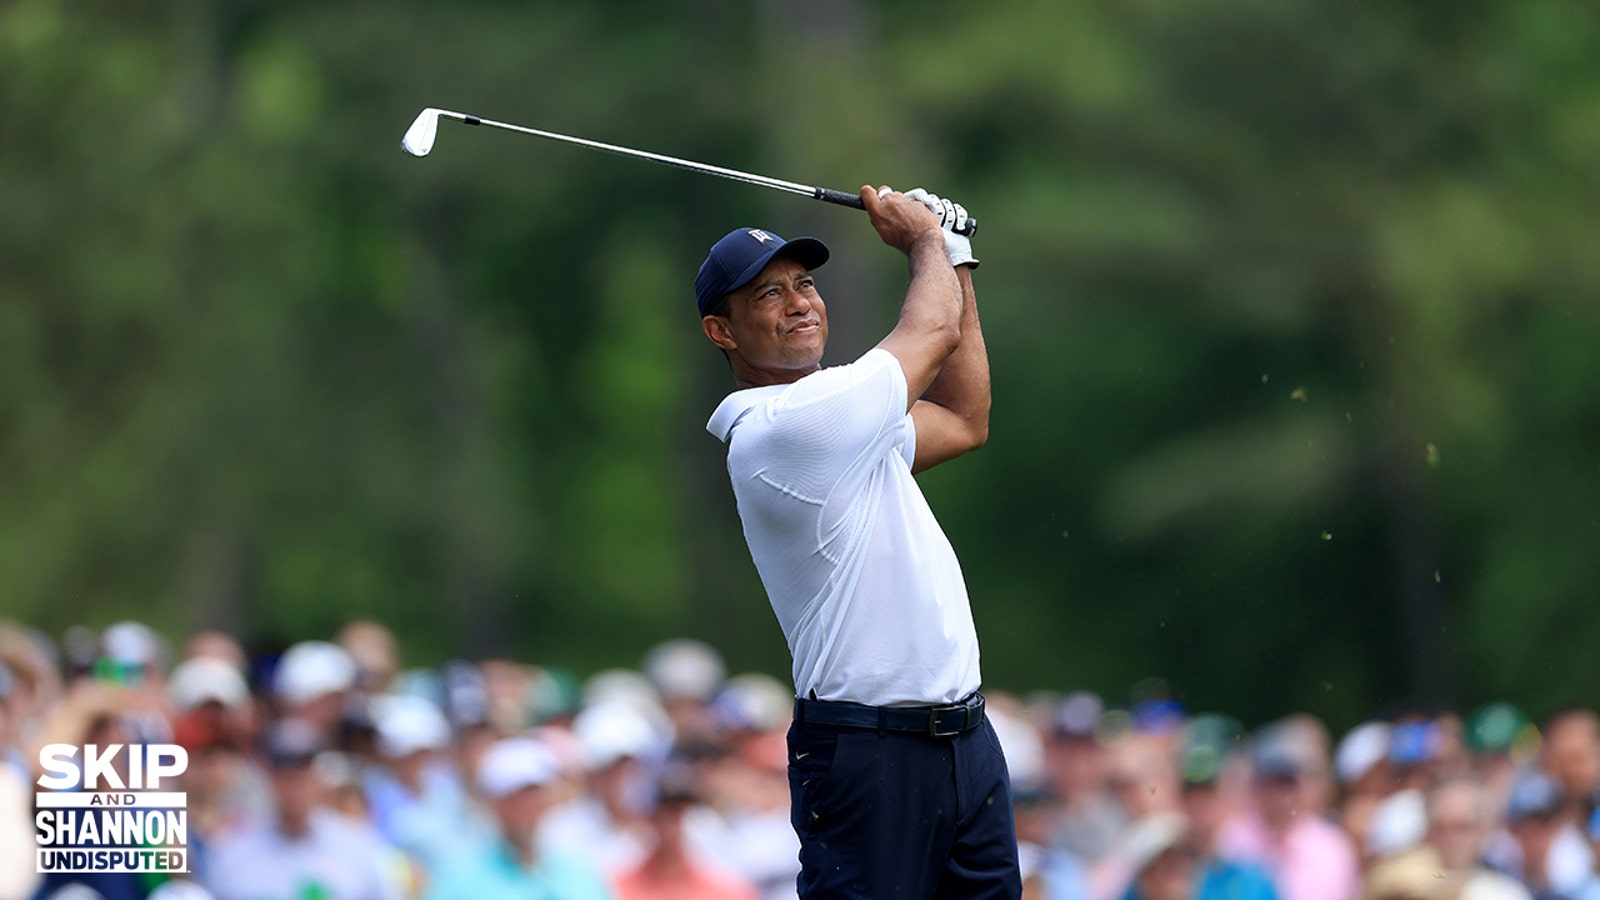 Tiger Woods finishes +2 (T-54th) in 1st round of Masters 